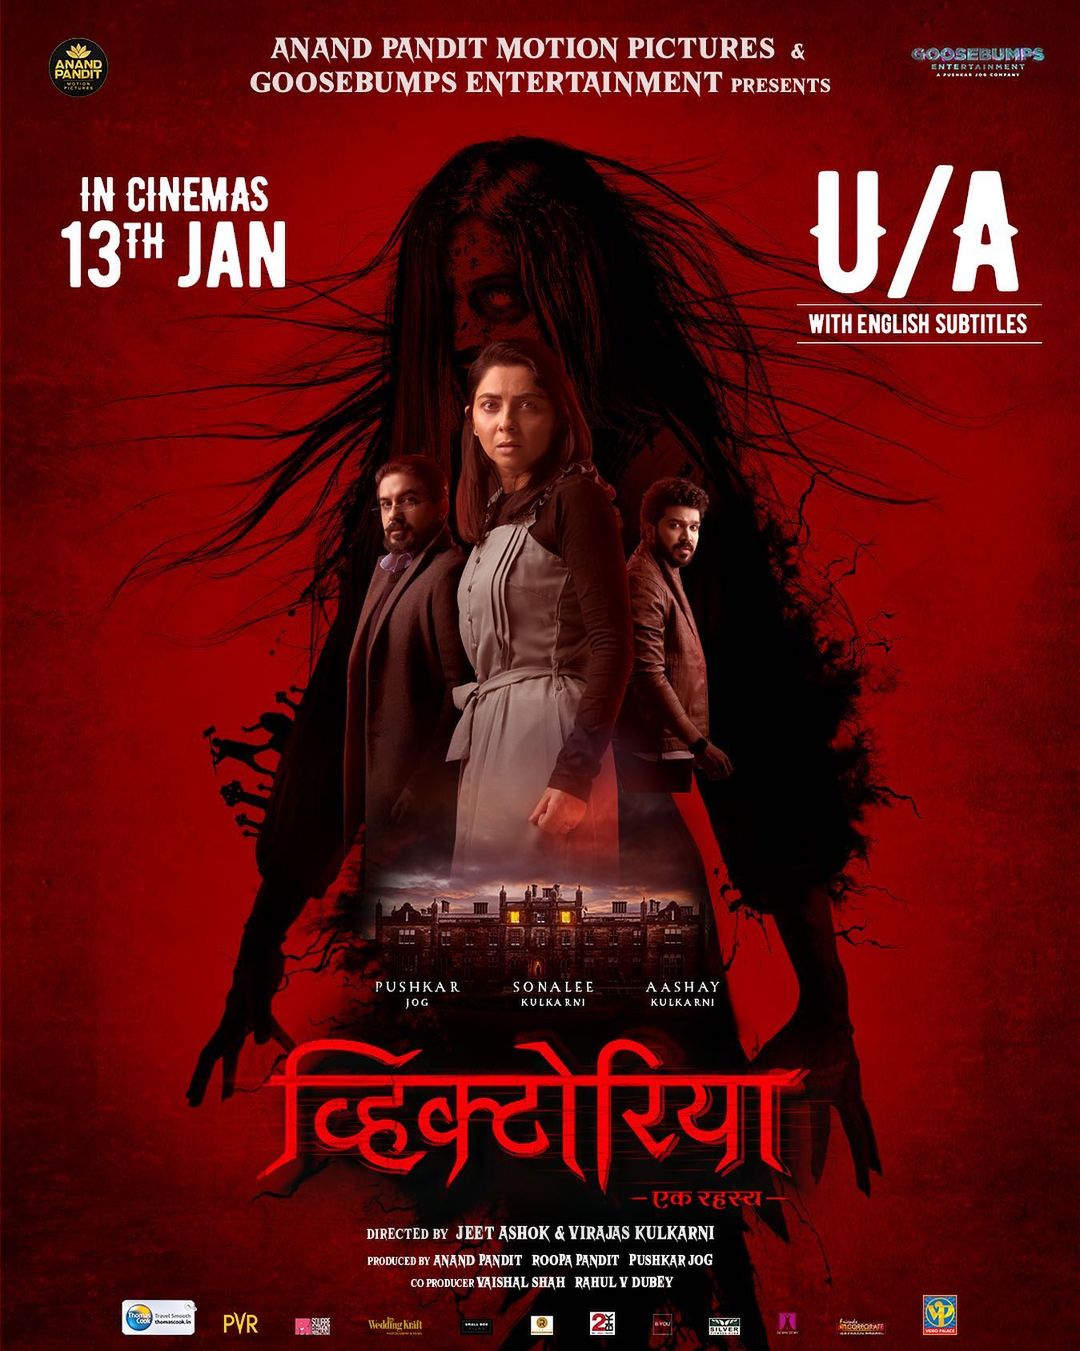 Victoria - Ek Rahasya Movie (2023) Cast, Release Date, Story, Budget, Collection, Poster, Trailer, Review